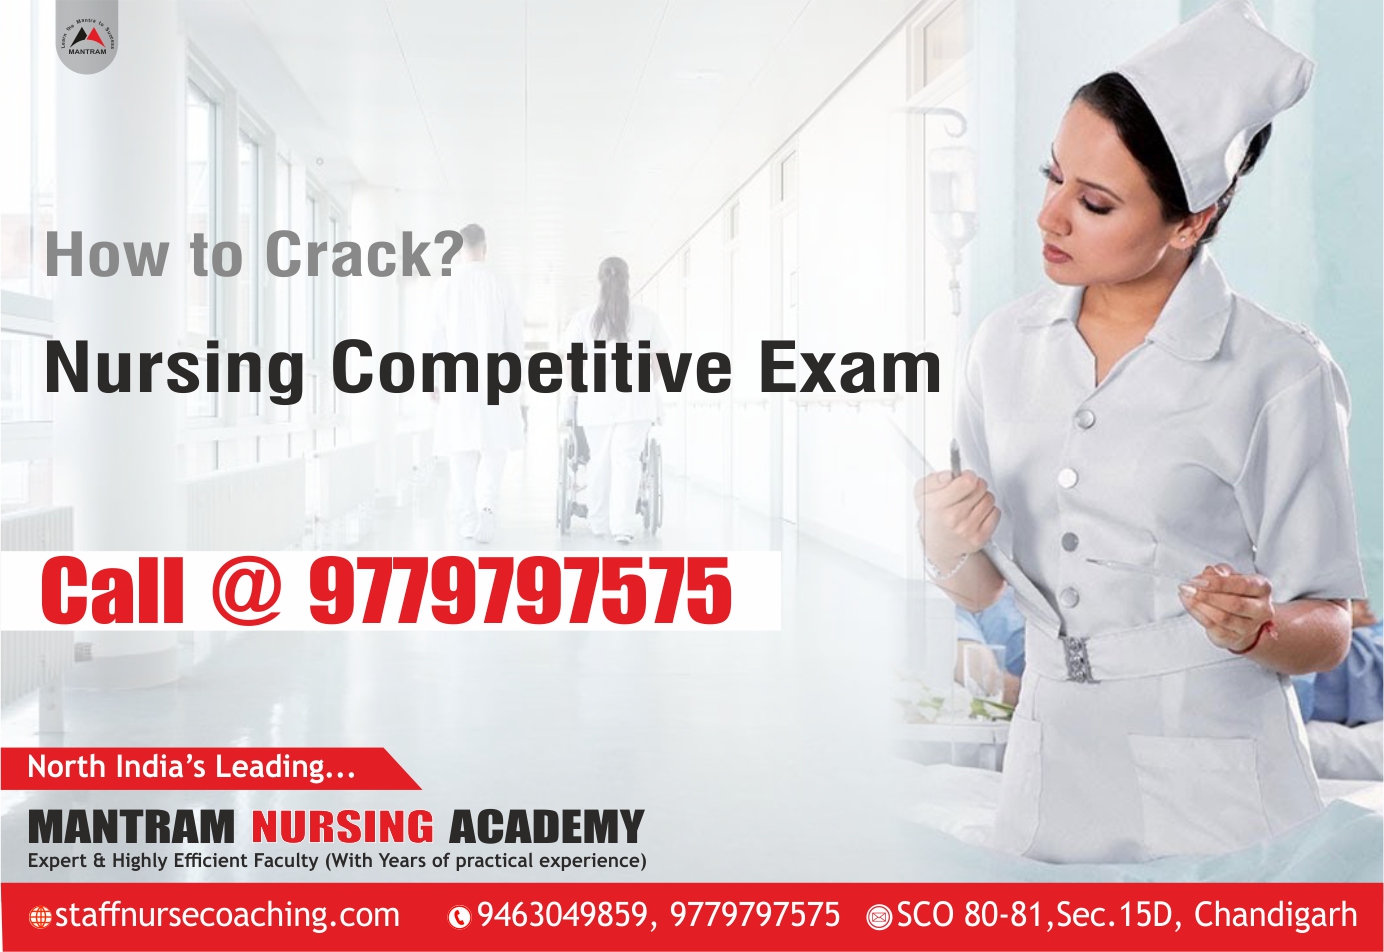 How to Crack Nursing Competitive Exams 2021: Preparation Tips